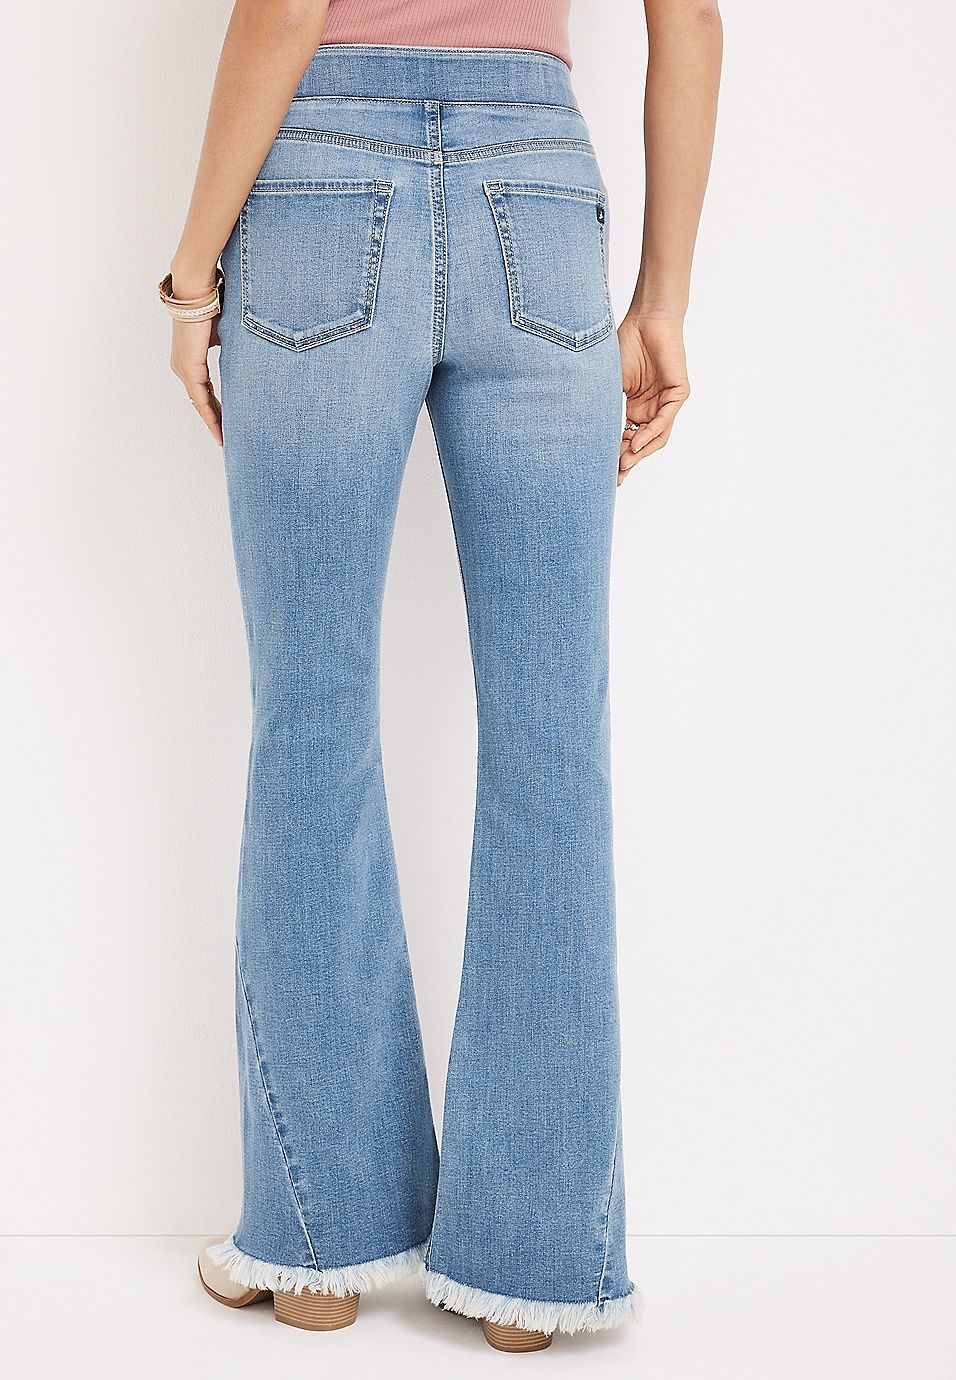 m jeans by maurices™ Cool Comfort Crossover Pull On Flare High Rise Jean | Maurices